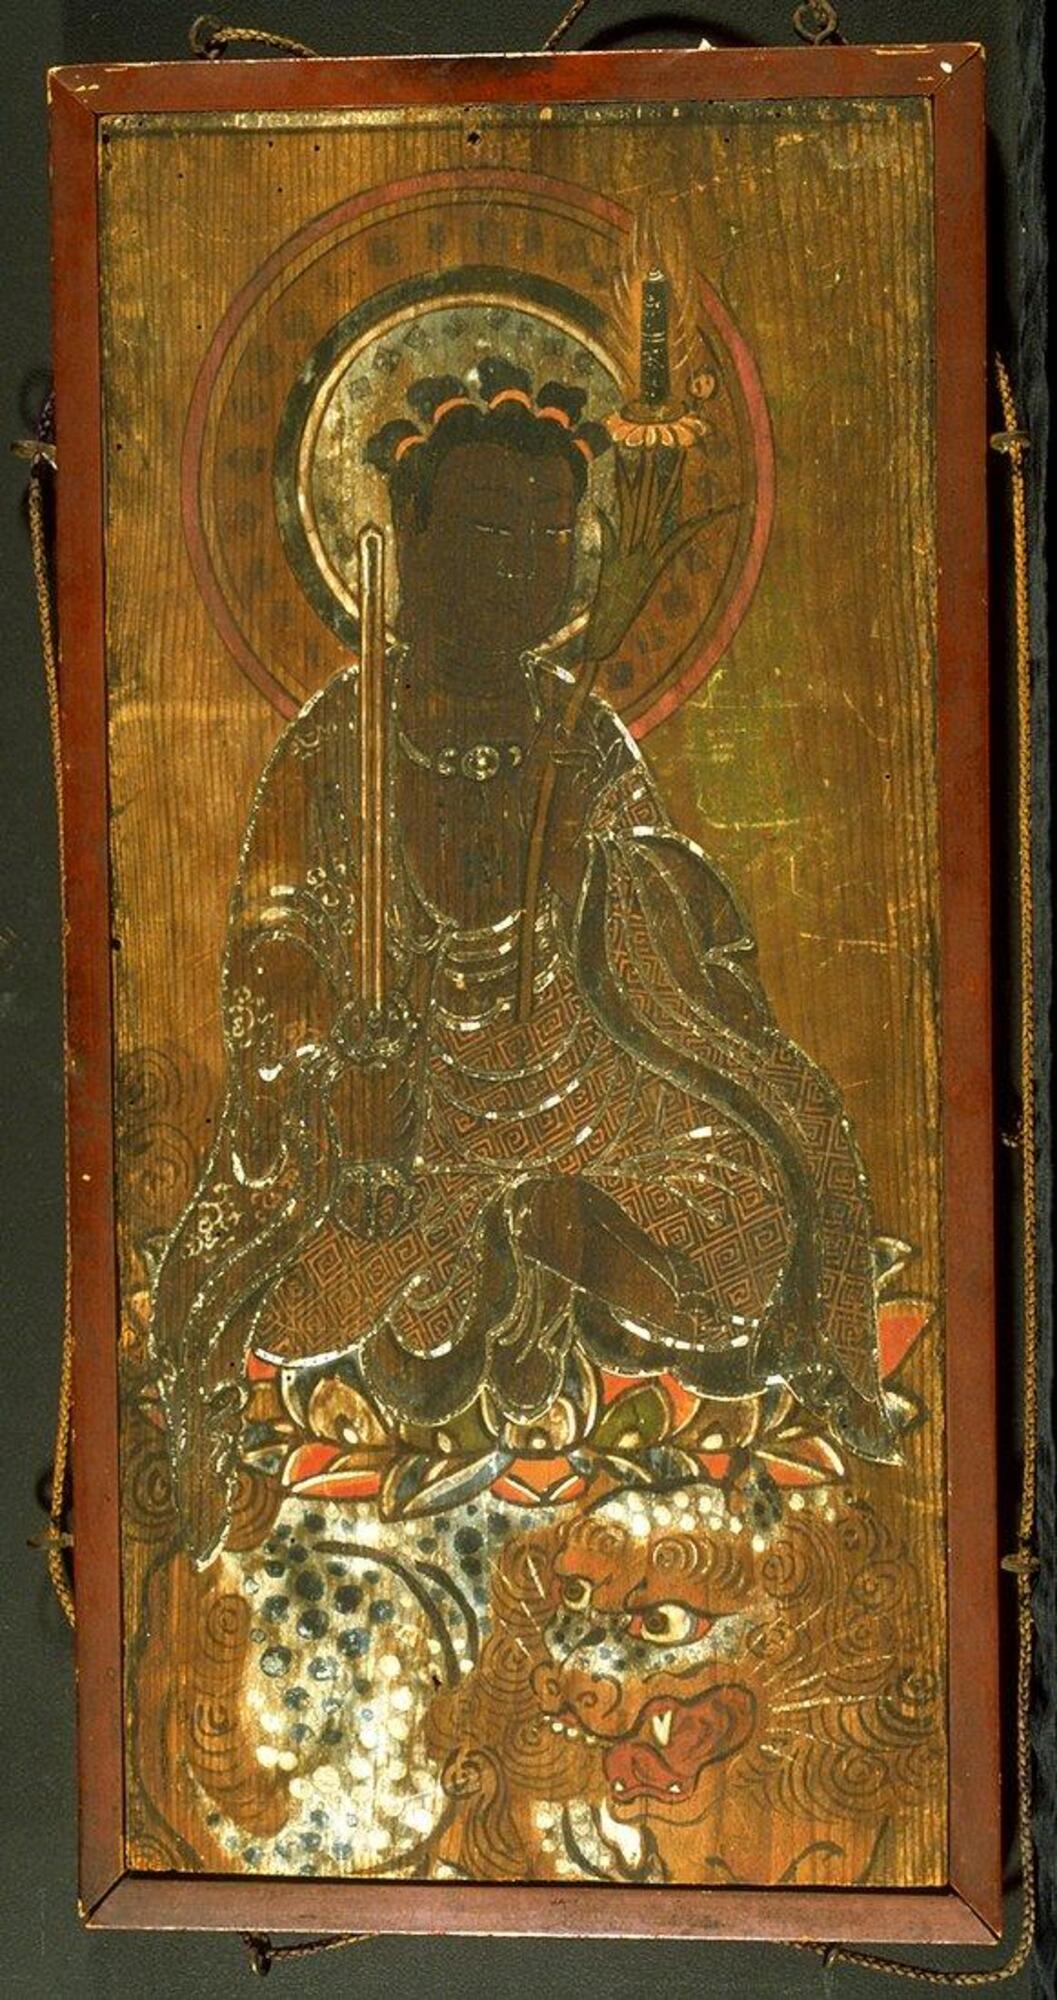 This depiction of Monju (Sanskrit: Mañjuśrī), the bodhisattva of wisdom, shows him seated on his typical lion mount, holding a vajra sword and lotus, upon which rests a sutra scroll. While most of the pigments have deteriorated with age, the brightly colored lotus and dappled skin of the lion suggest the original vibrant colors of the image. 